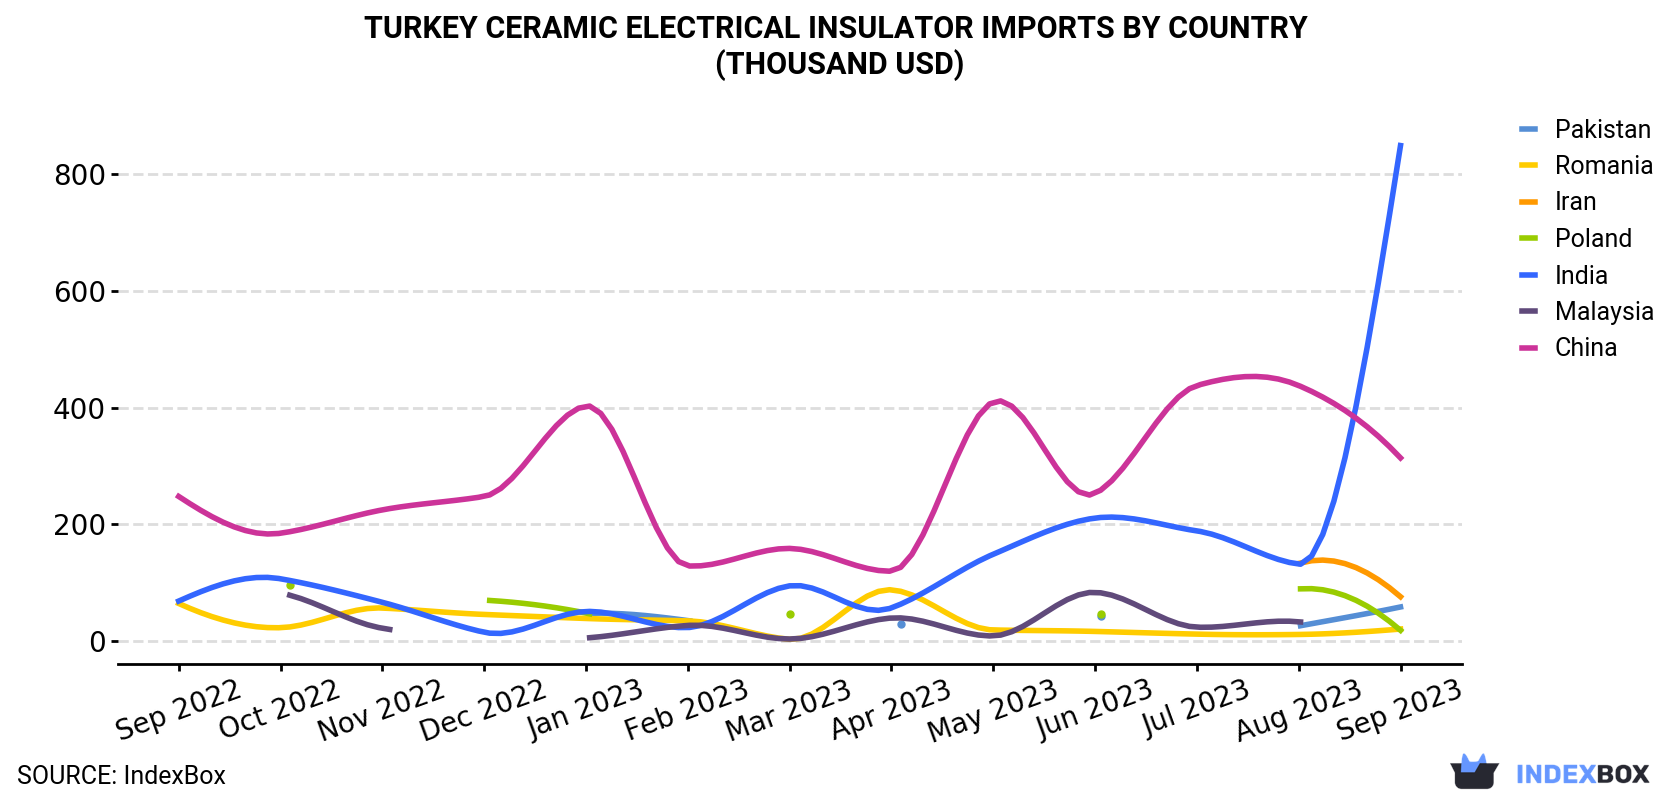 Turkey Ceramic Electrical Insulator Imports By Country (Thousand USD)